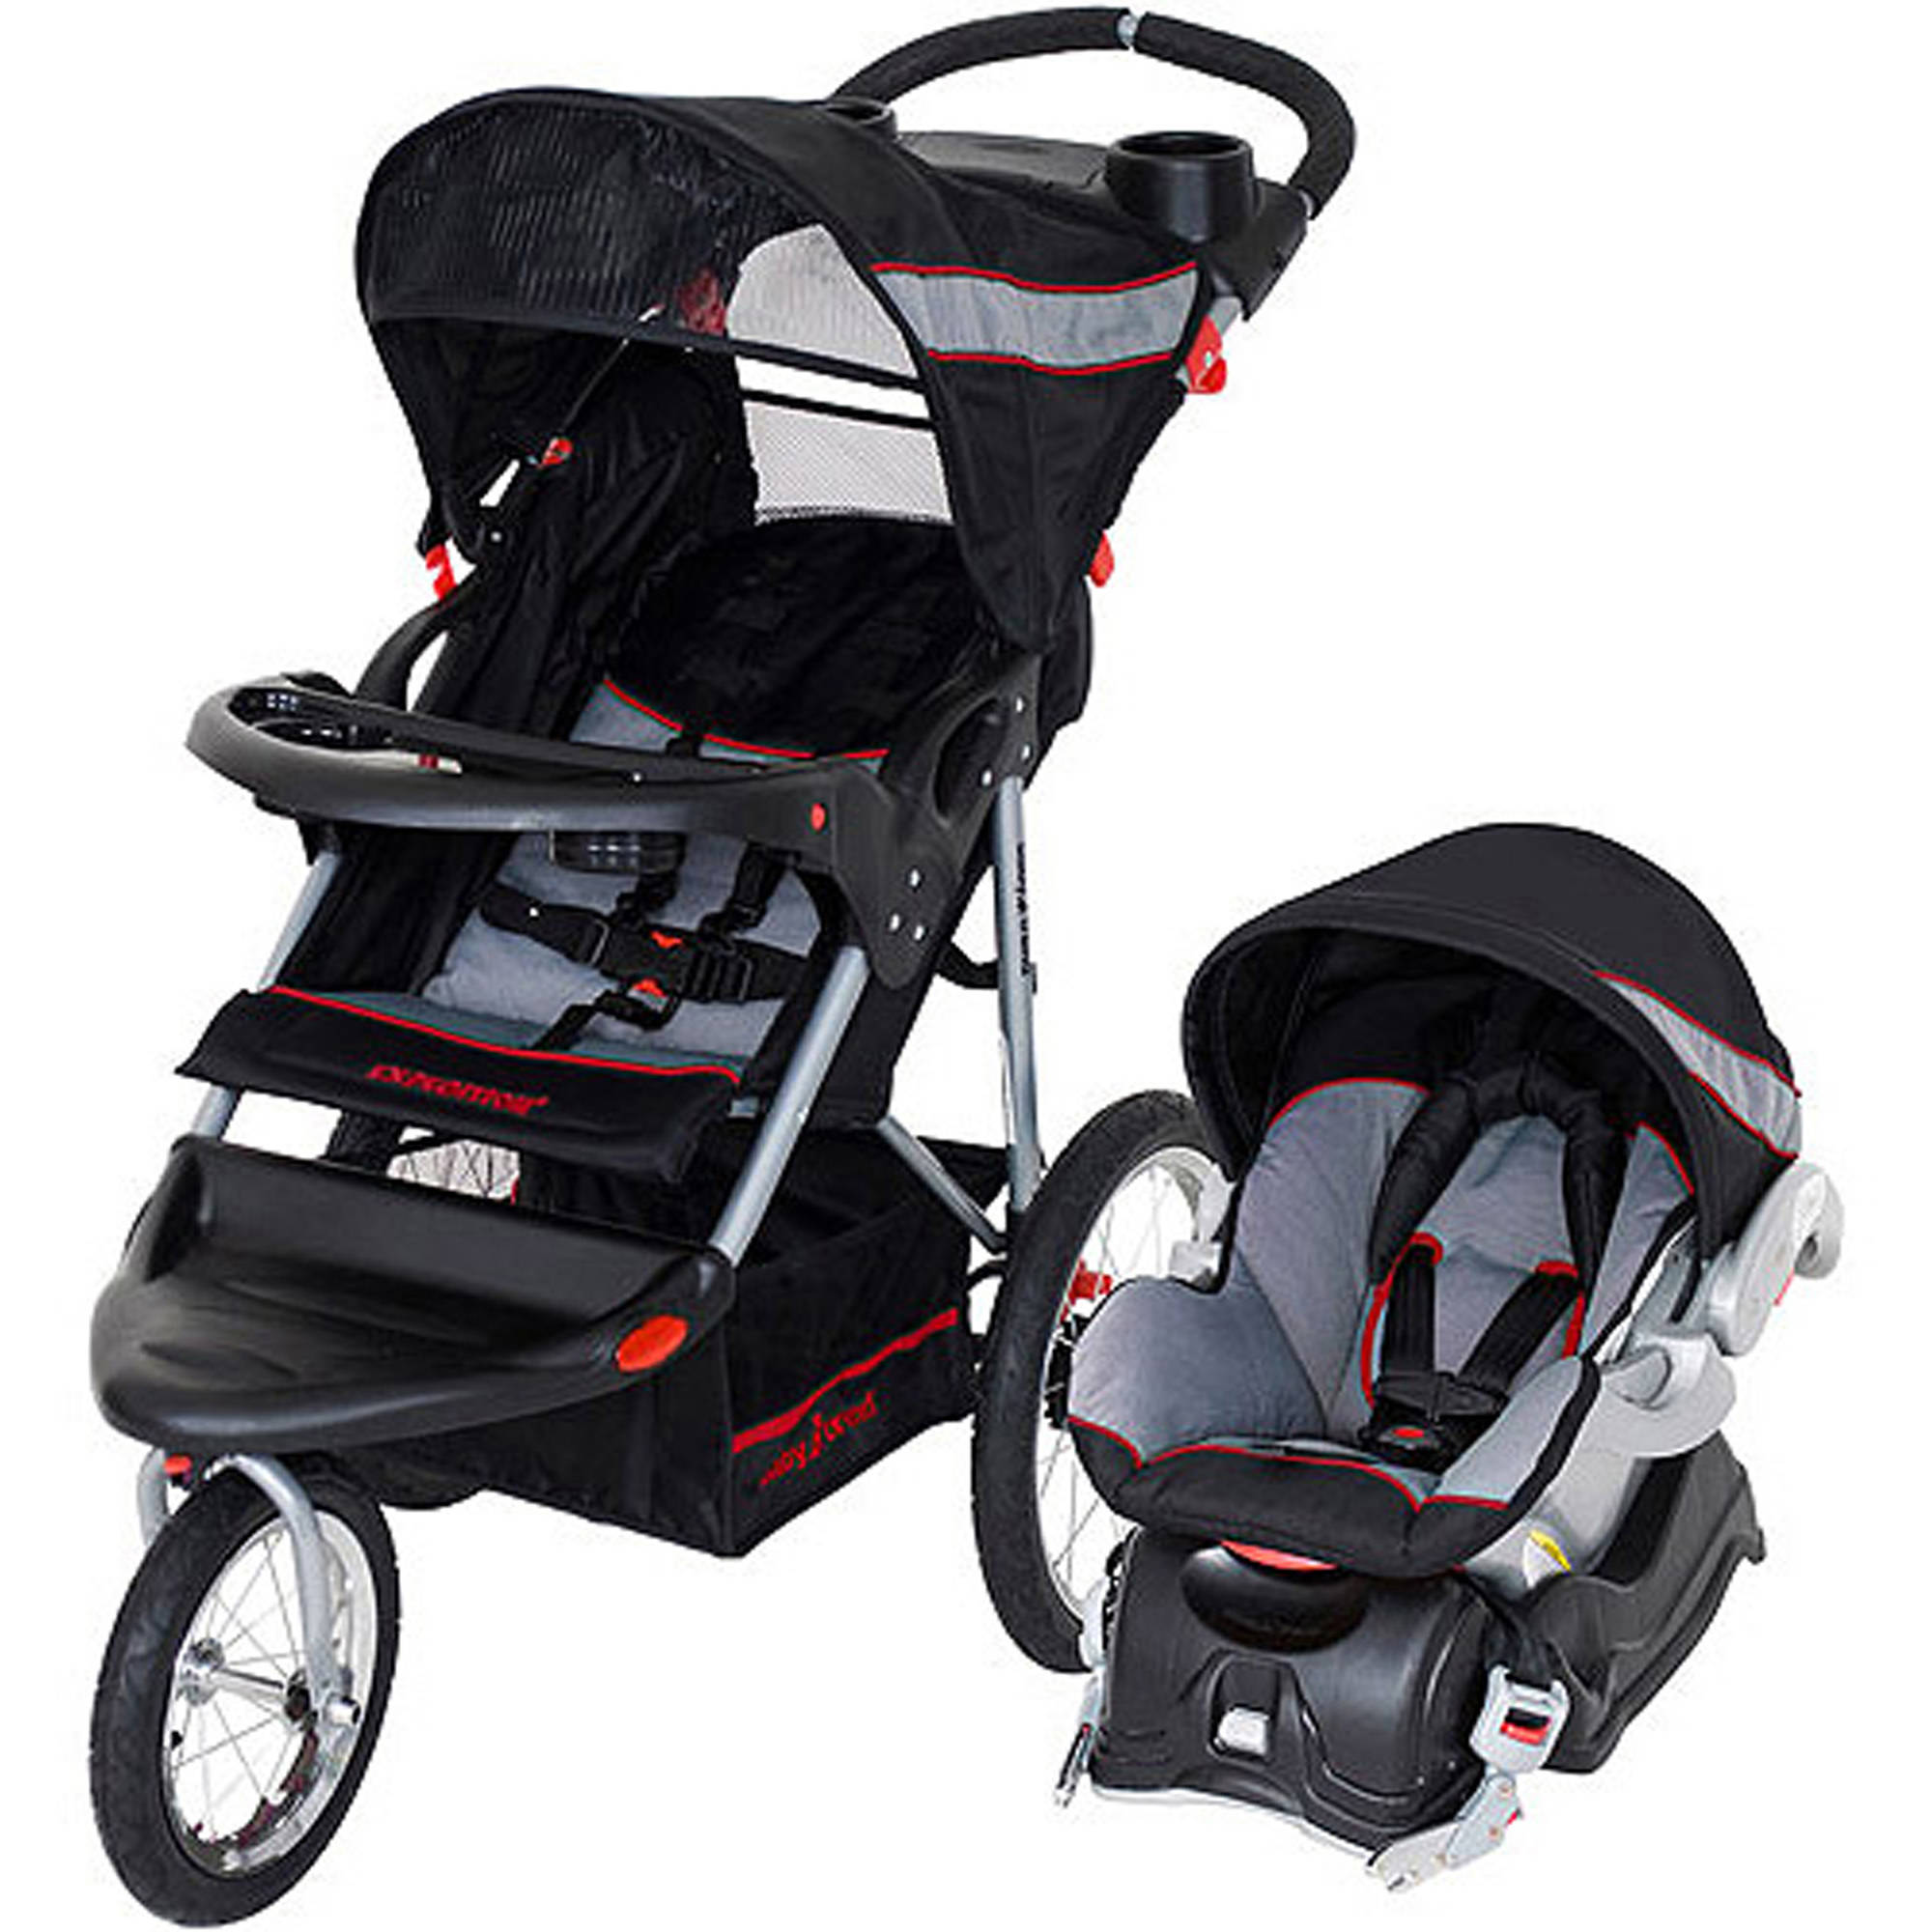 Baby Trend Expedition Jogger Travel System W Stroller Car Seat Expired